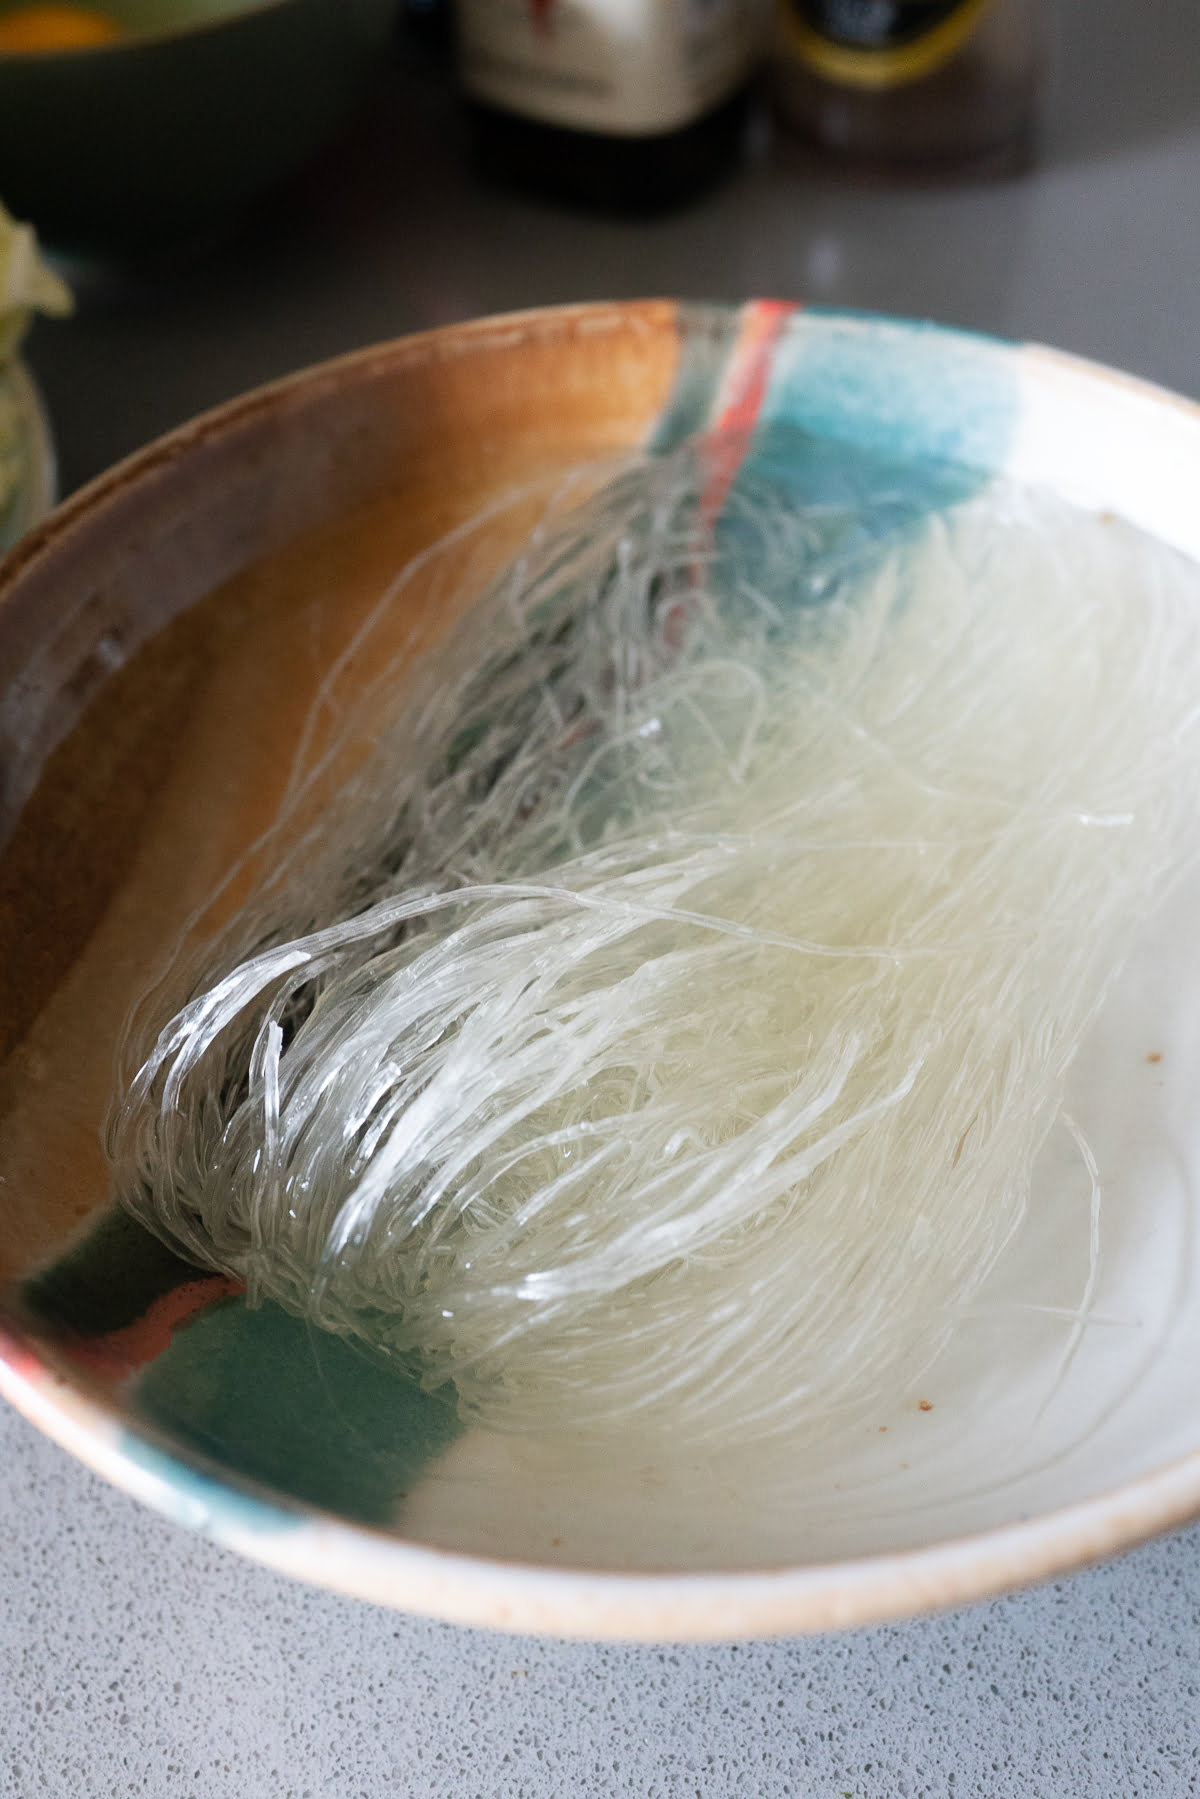 Soaking glass noodles (aka cellophane noodles) in water.